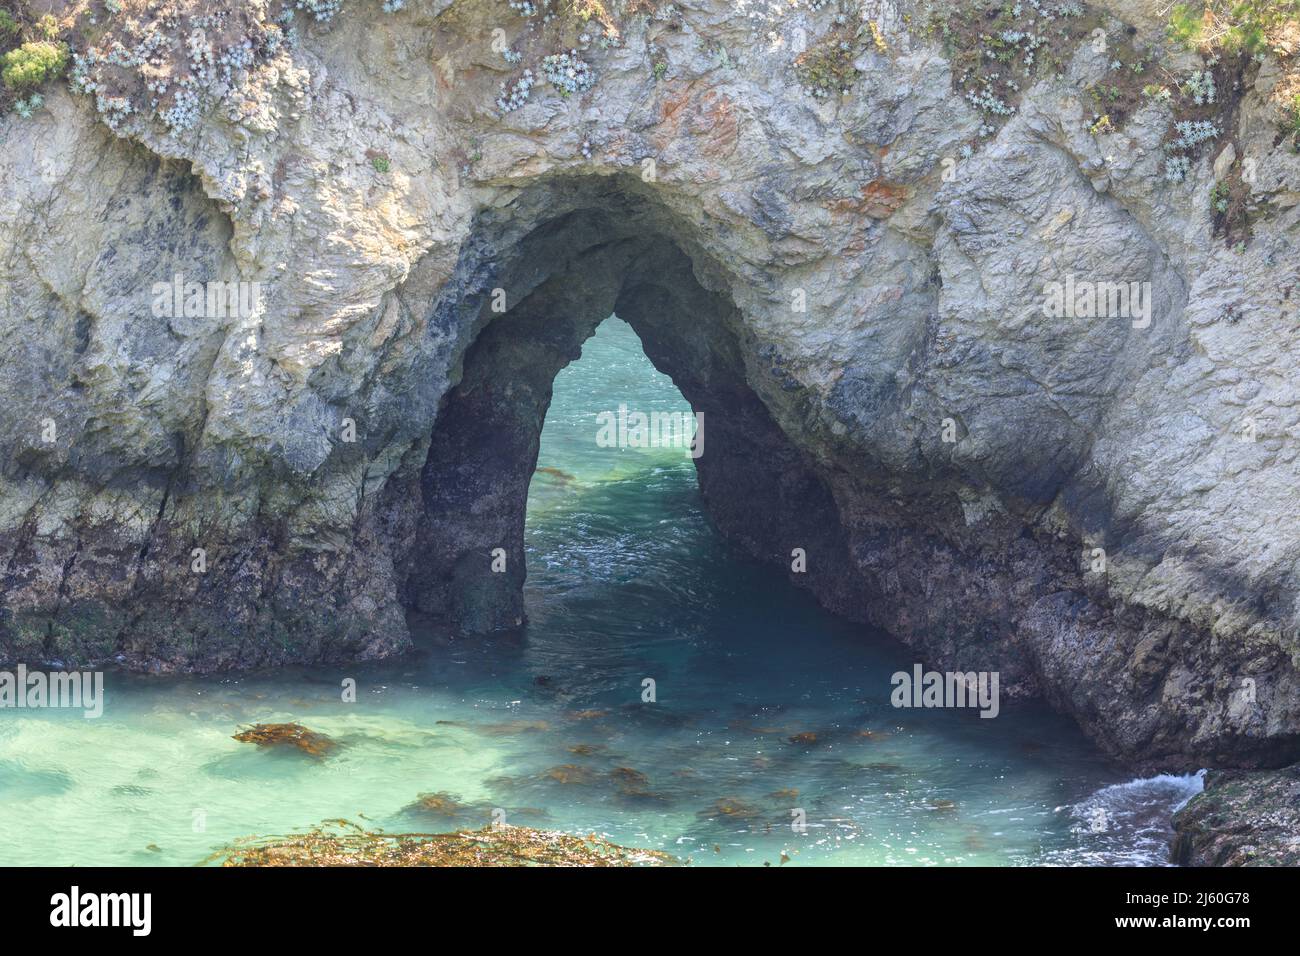 China Cove Rock Arch im Point Lobos State Natural Preserve, Monterey County, Kalifornien. Stockfoto